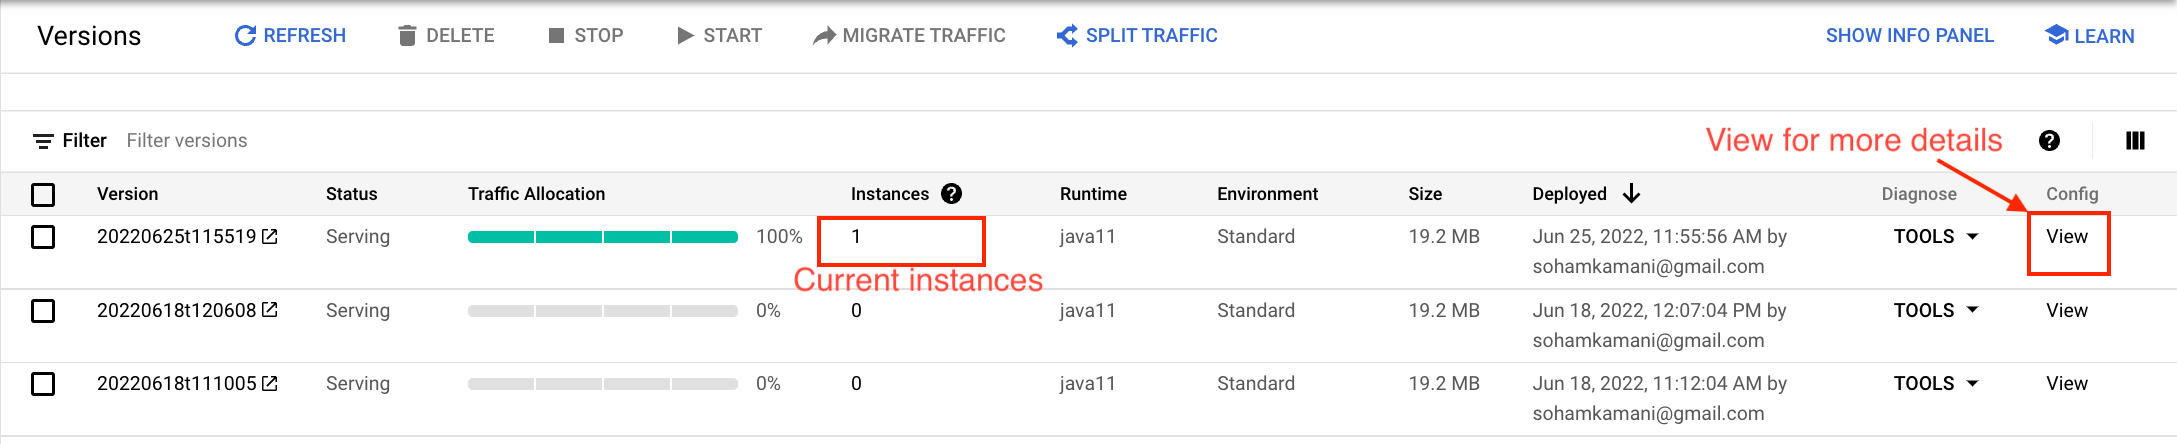 version dashboard showing instance count and config view